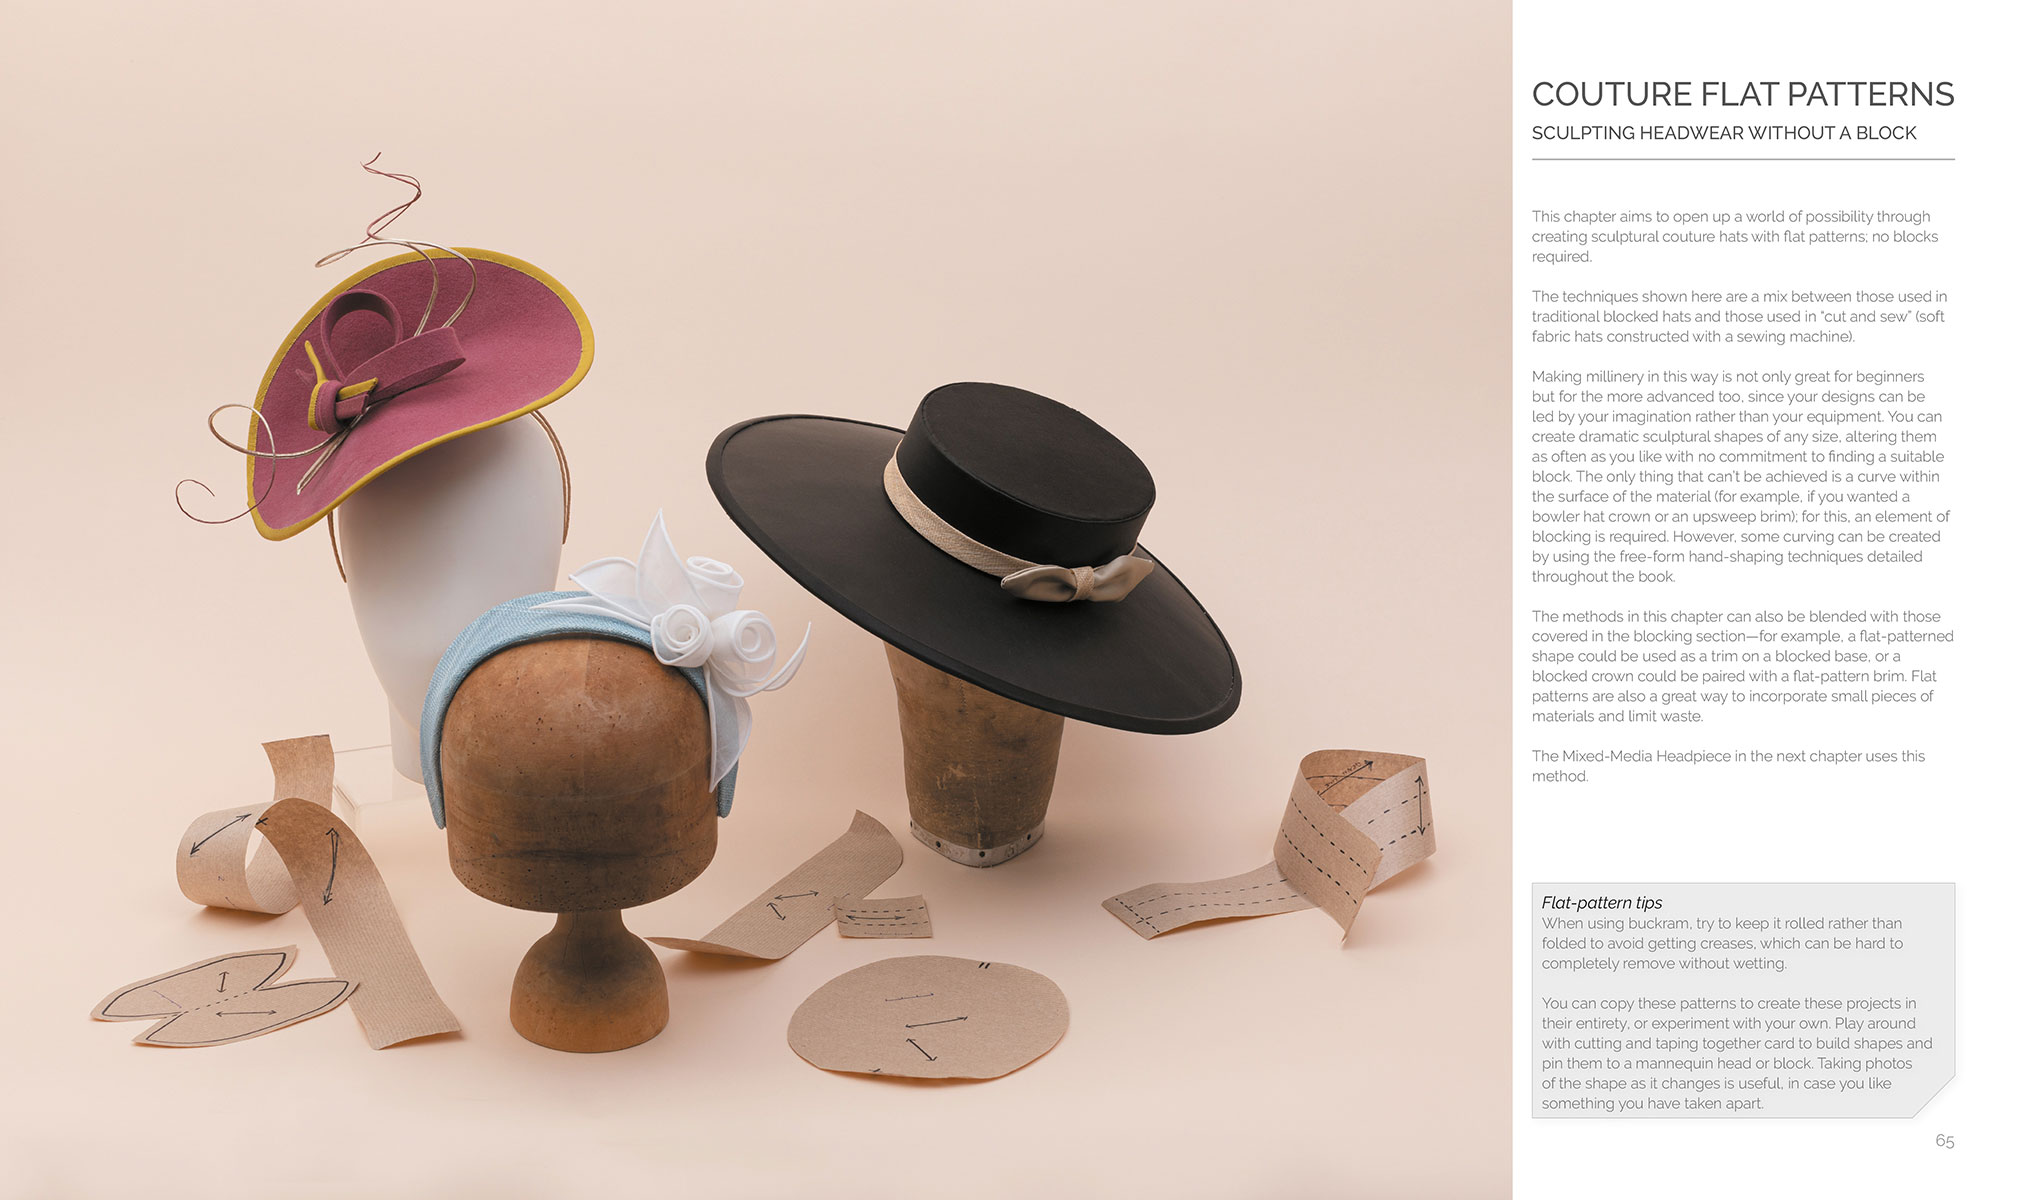 Contemporary Millinery Page 64-65